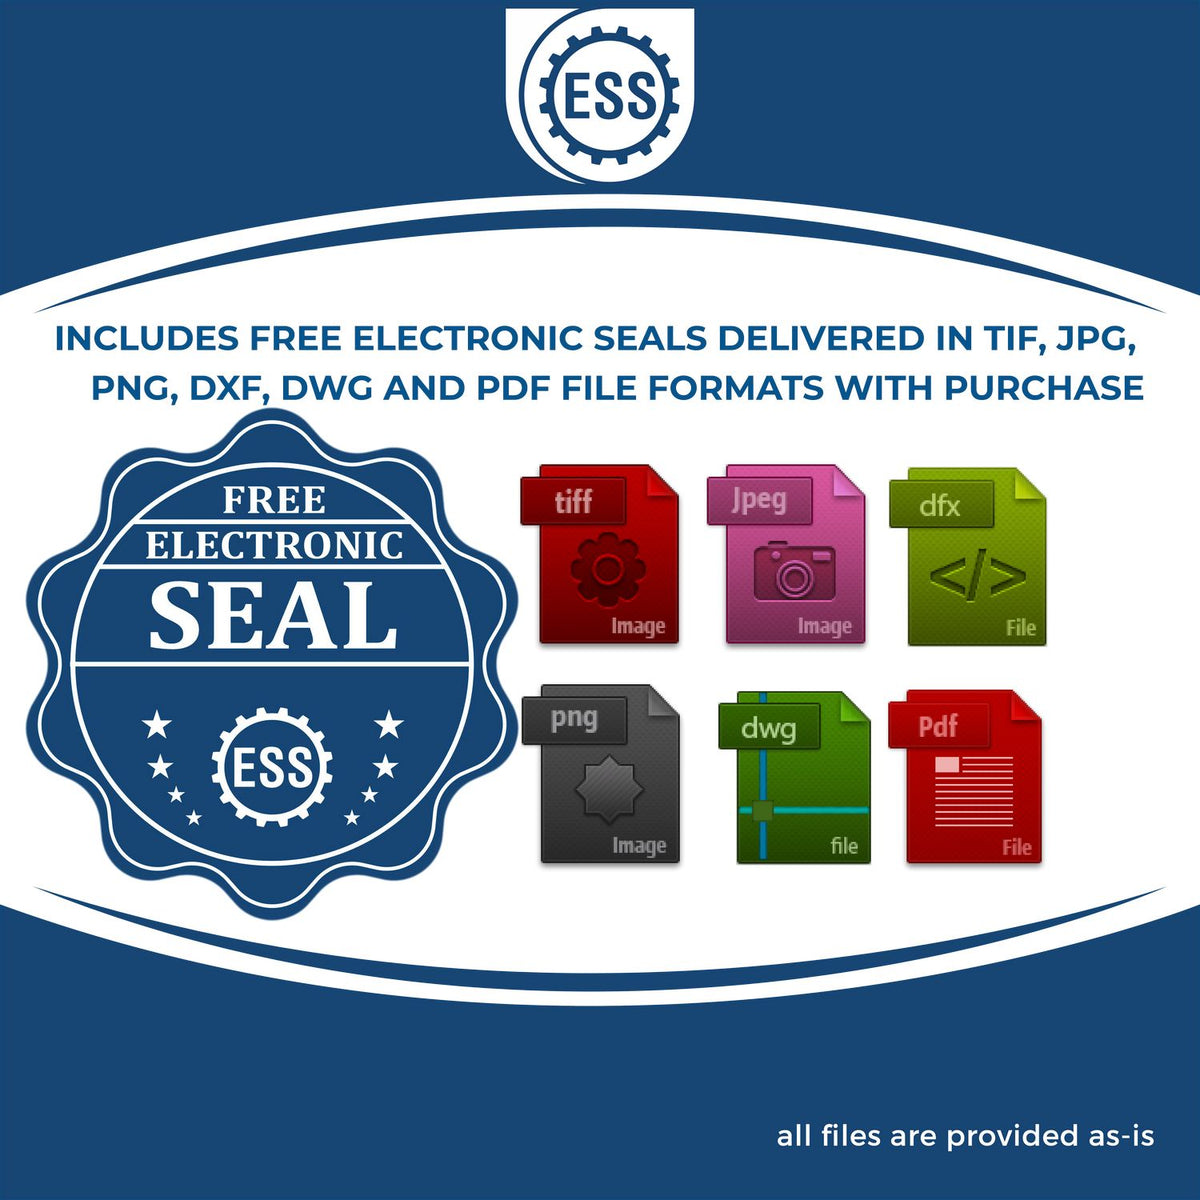 An infographic for the free electronic seal for the Long Reach Montana Land Surveyor Seal illustrating the different file type icons such as DXF, DWG, TIF, JPG and PNG.